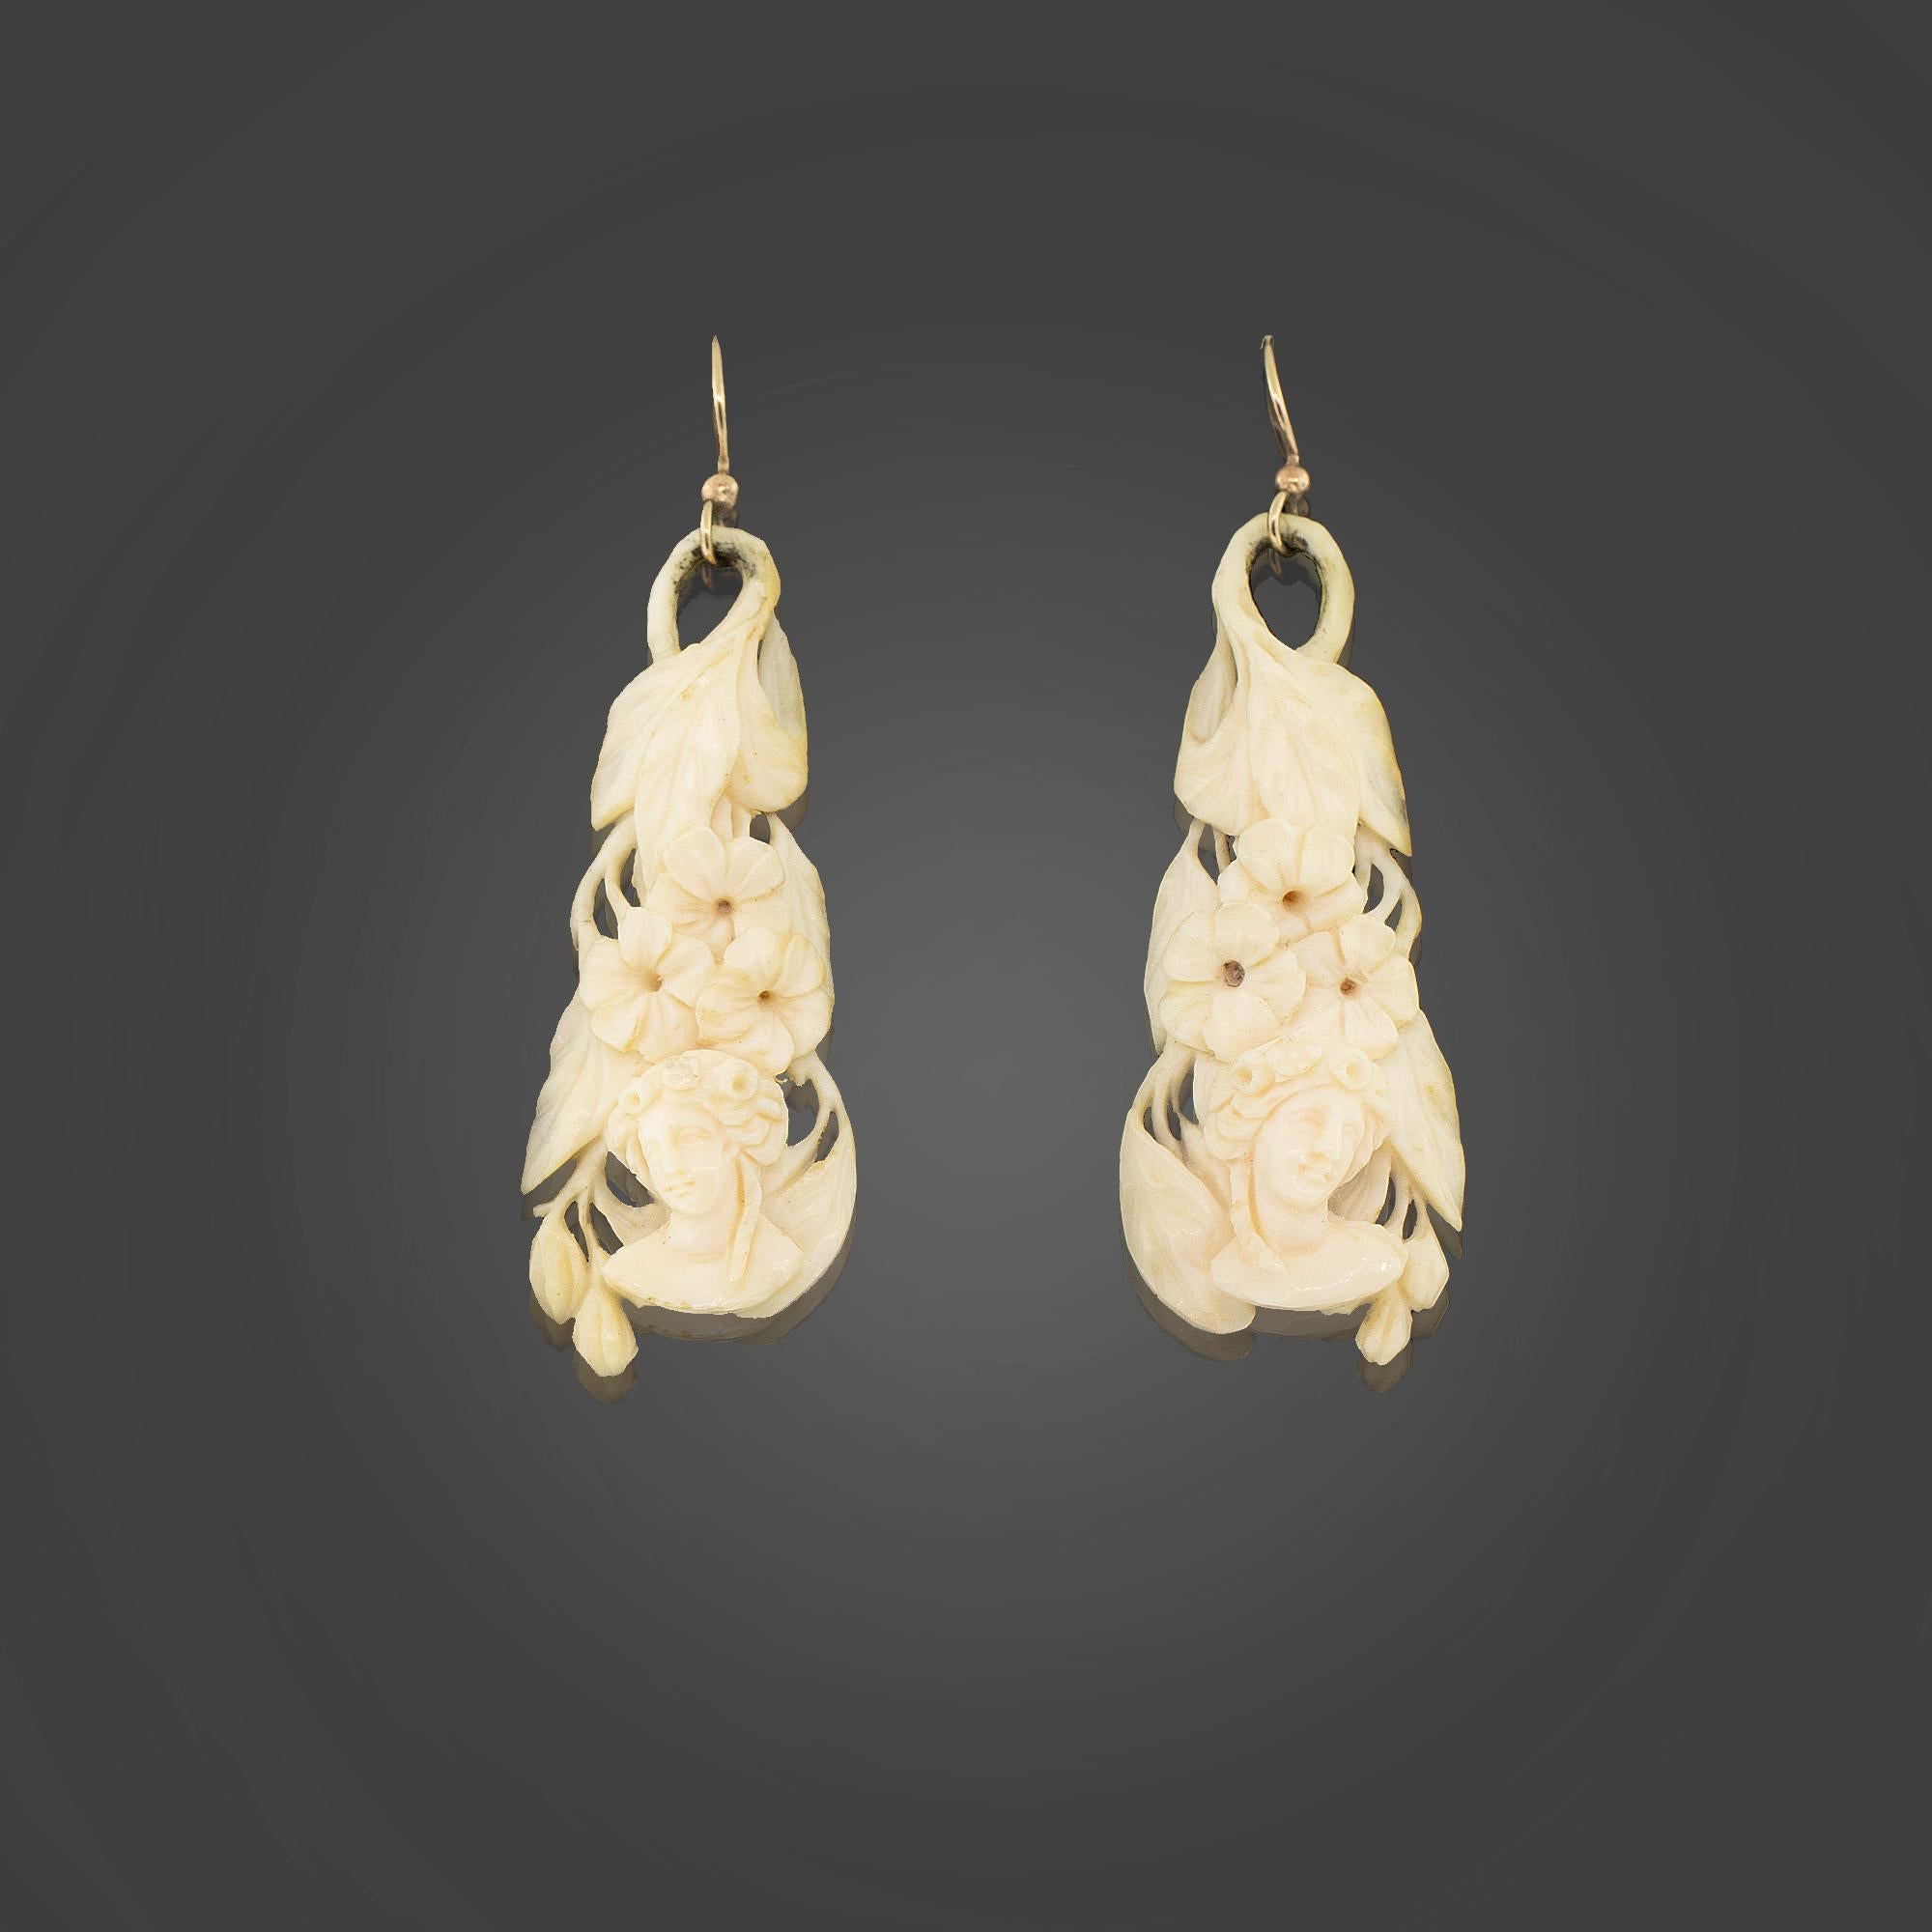 One Pair of mid-Victorian hand carved ivory drop earrings. Featuring with a woman in cameo relief with a floral background. Fitted with 9k gold shepherd’s hooks.

Metal: 9k yellow gold
Weight: 8.38 grams
Measurements: Length 6.5cm
Era: Mid-Victorian